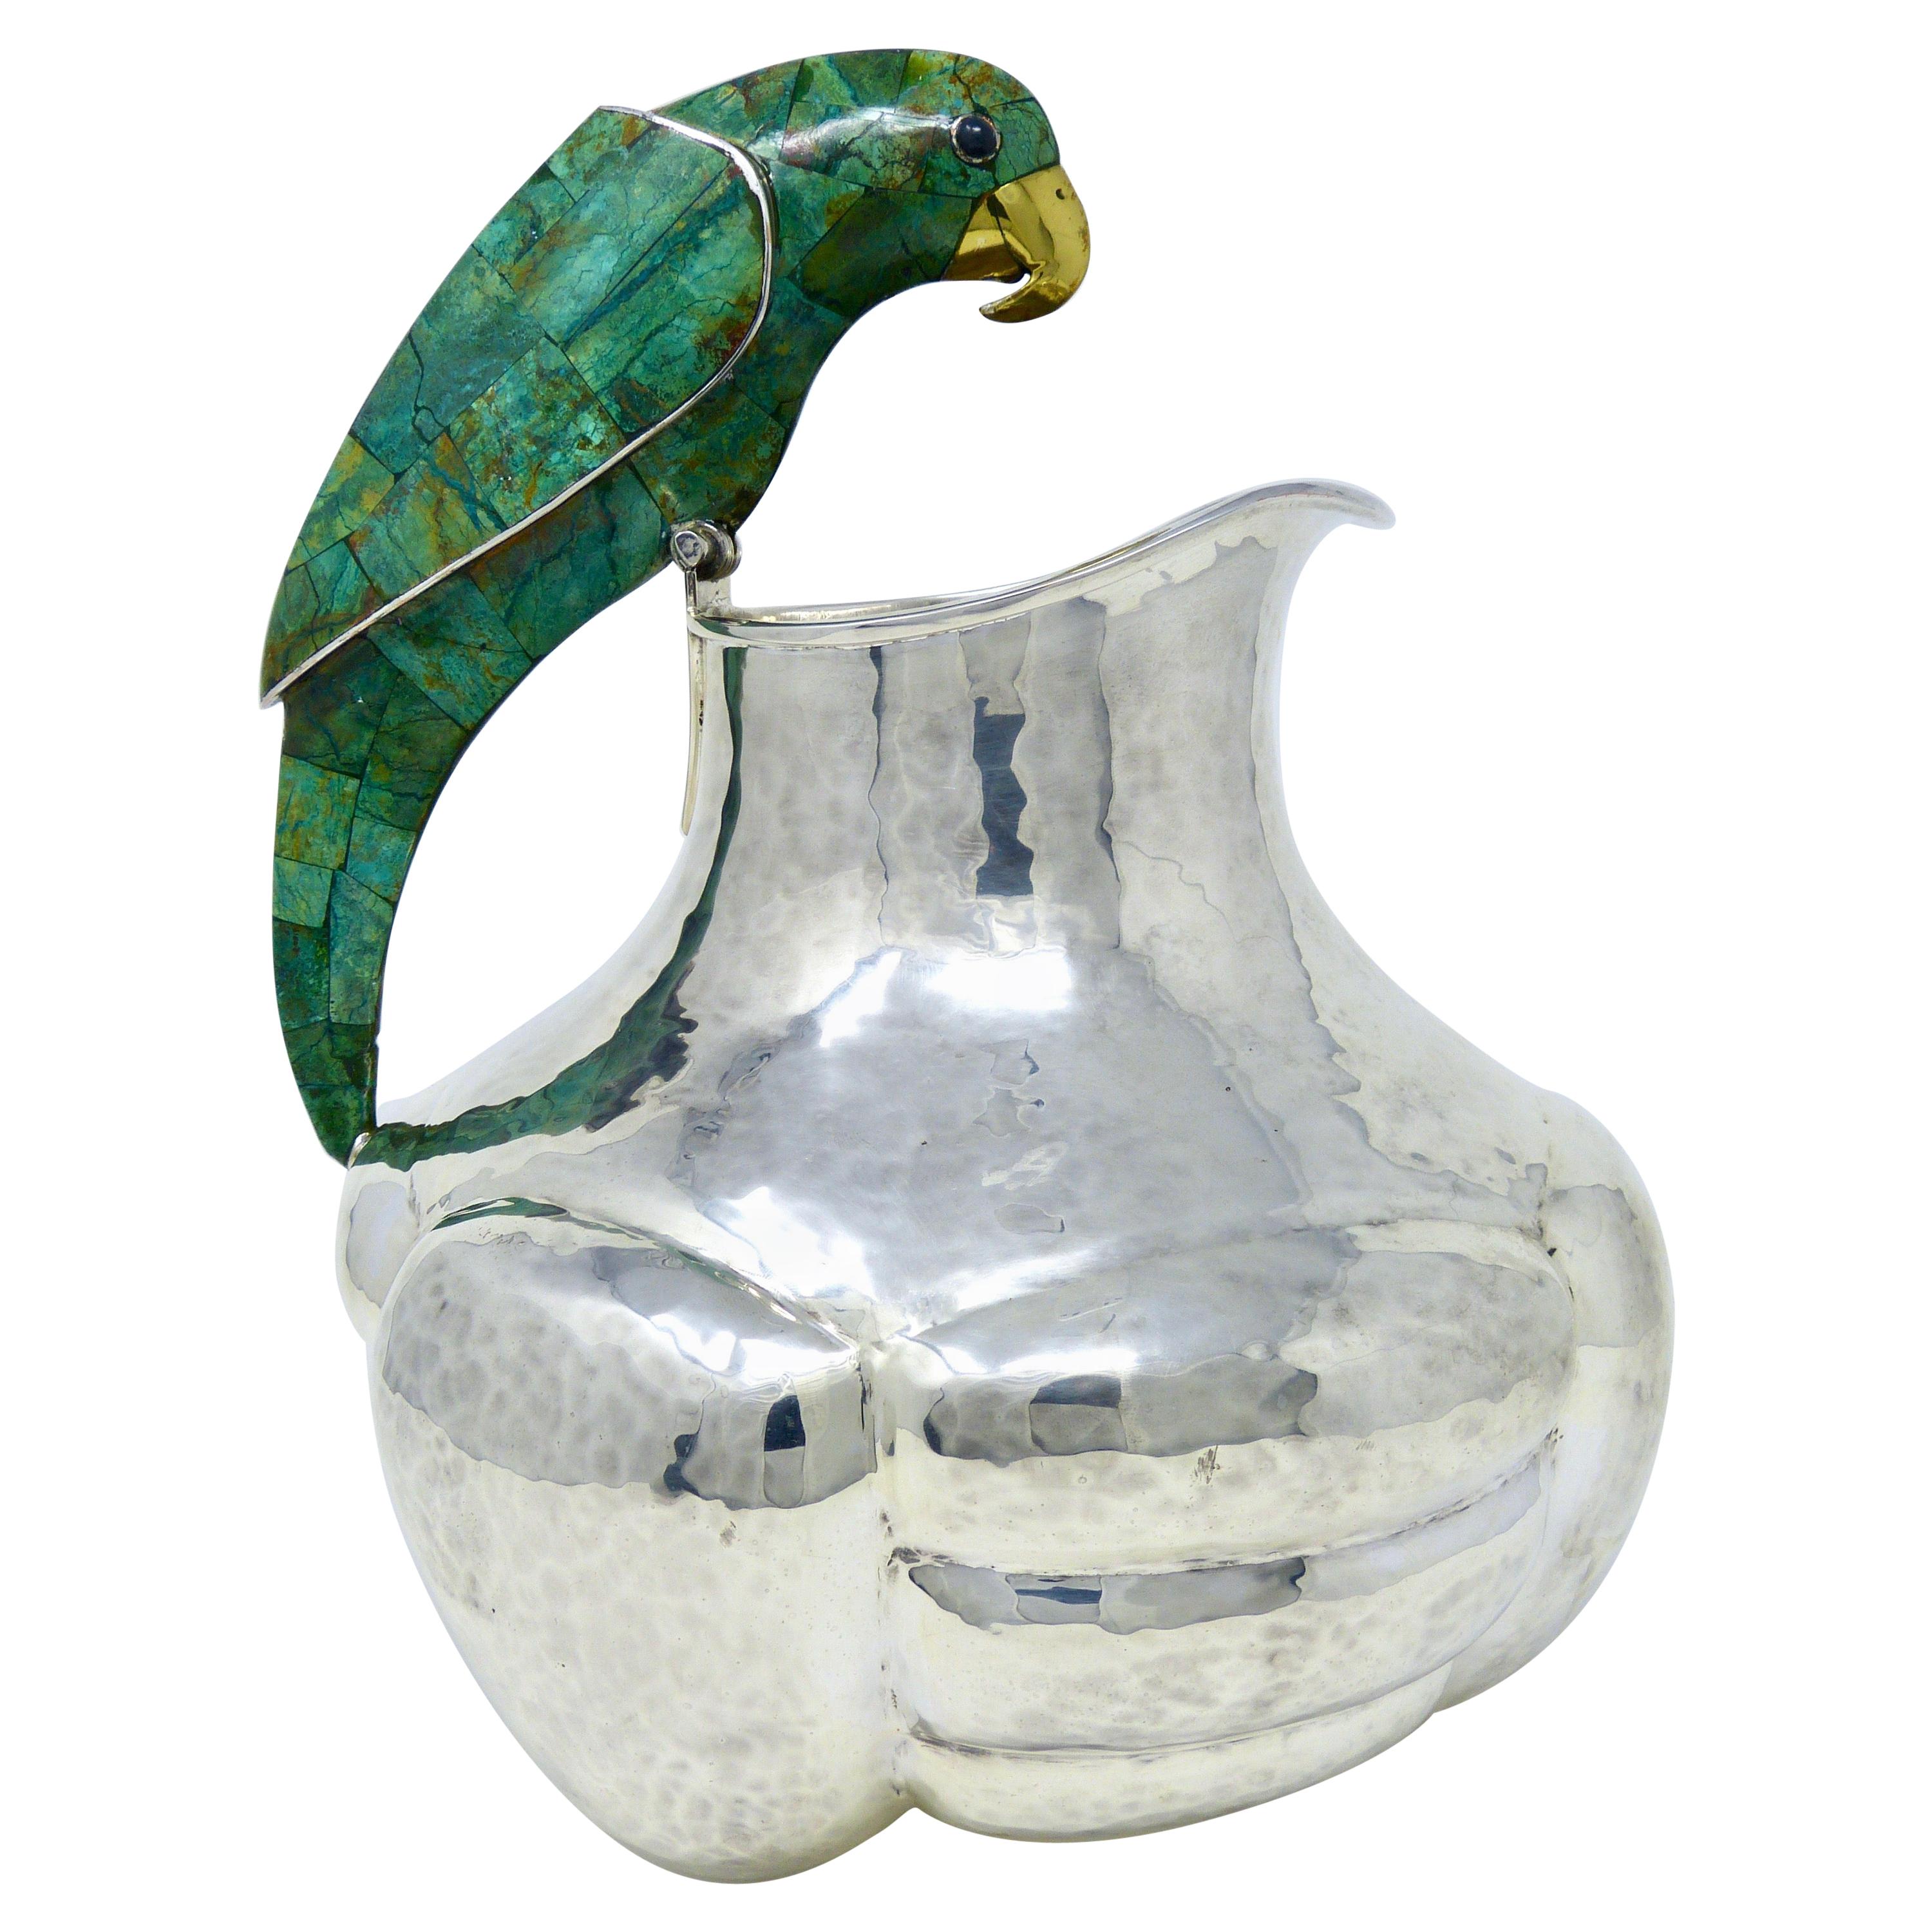 Emilia Castillo Silver Plated and Malachite Water Pitcher with Parrot Taxco, Mx